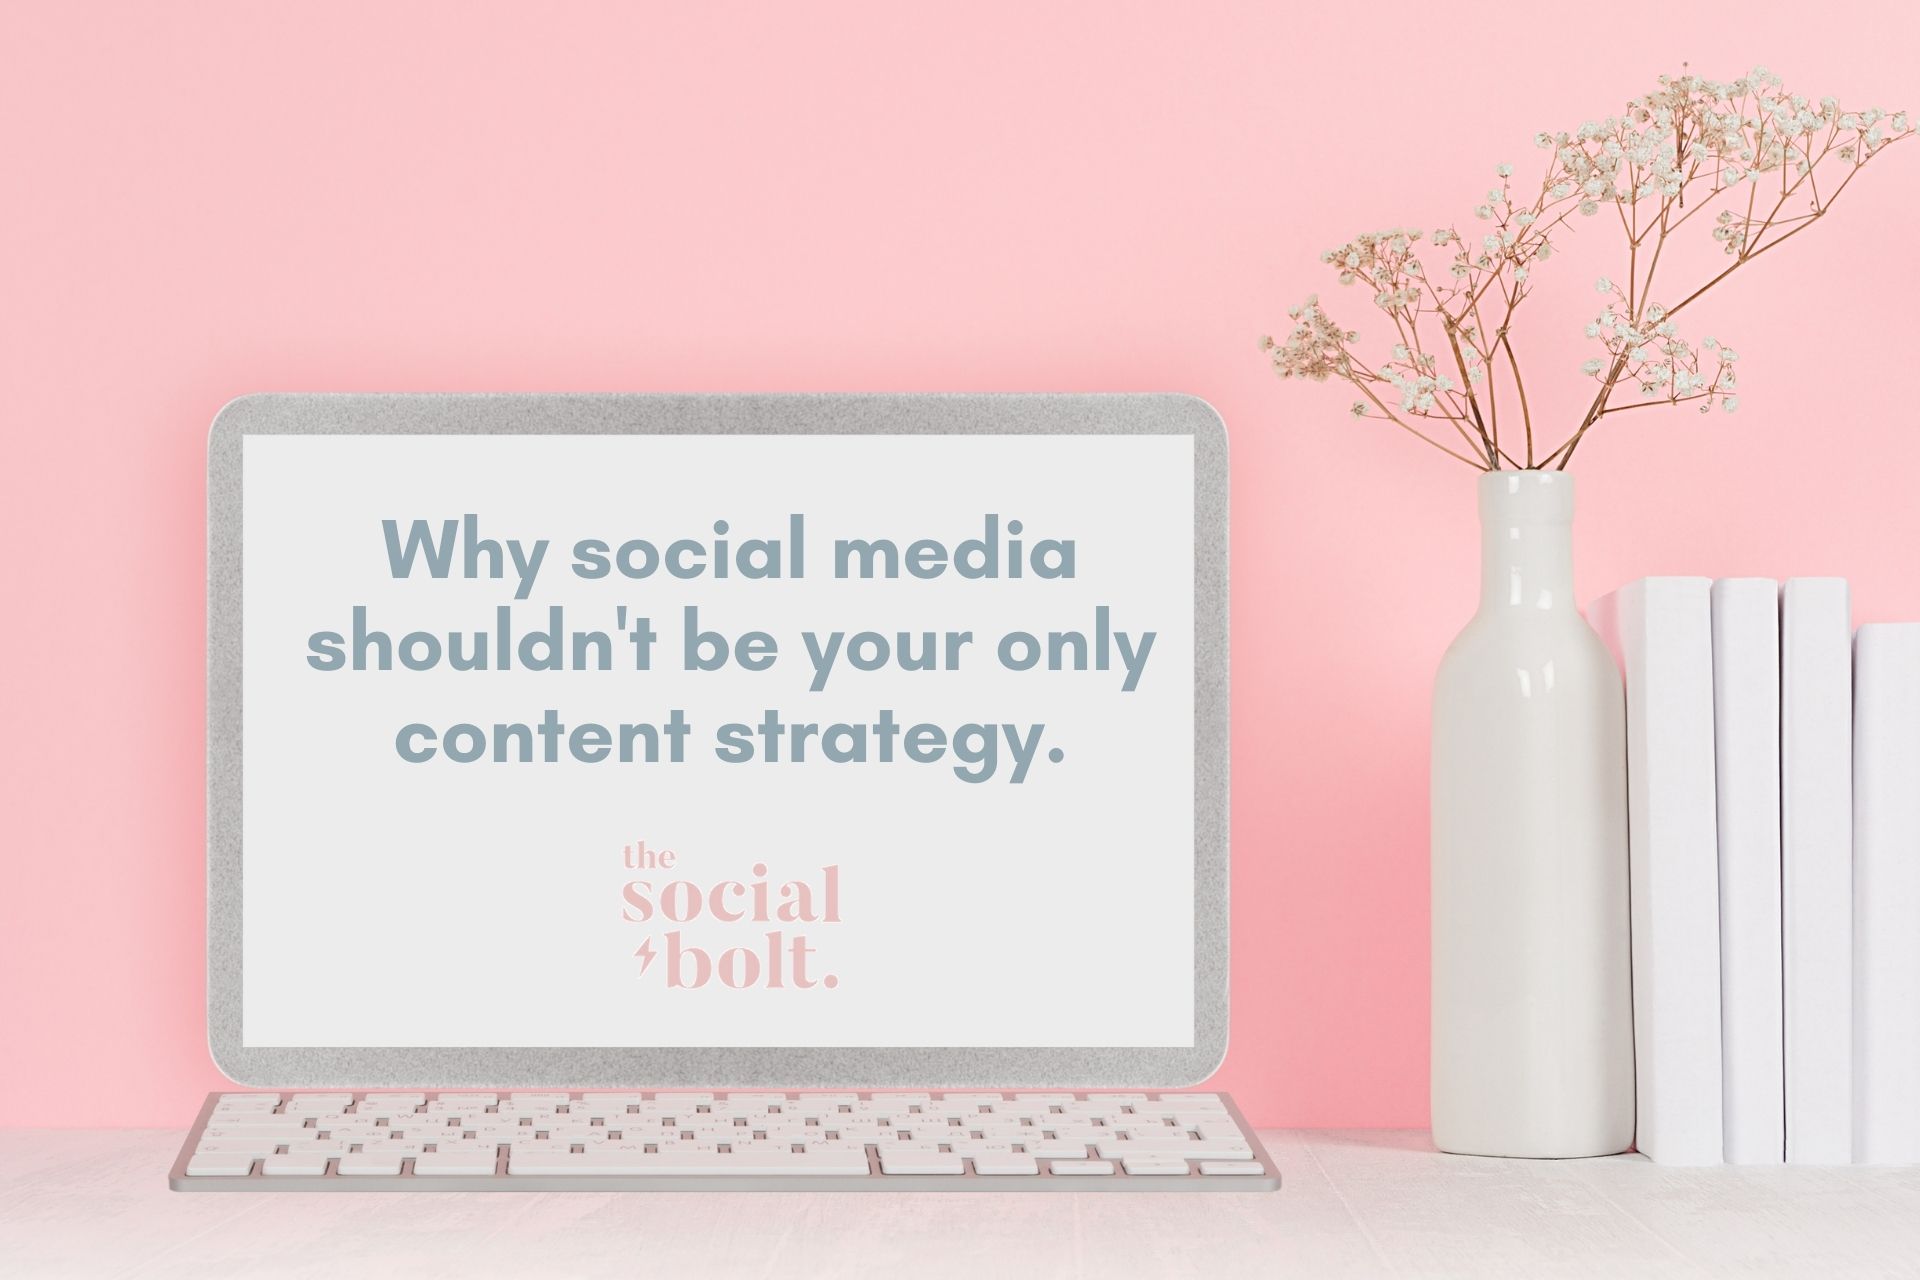 social-media-shouldnt-be-your-only-content-strategy